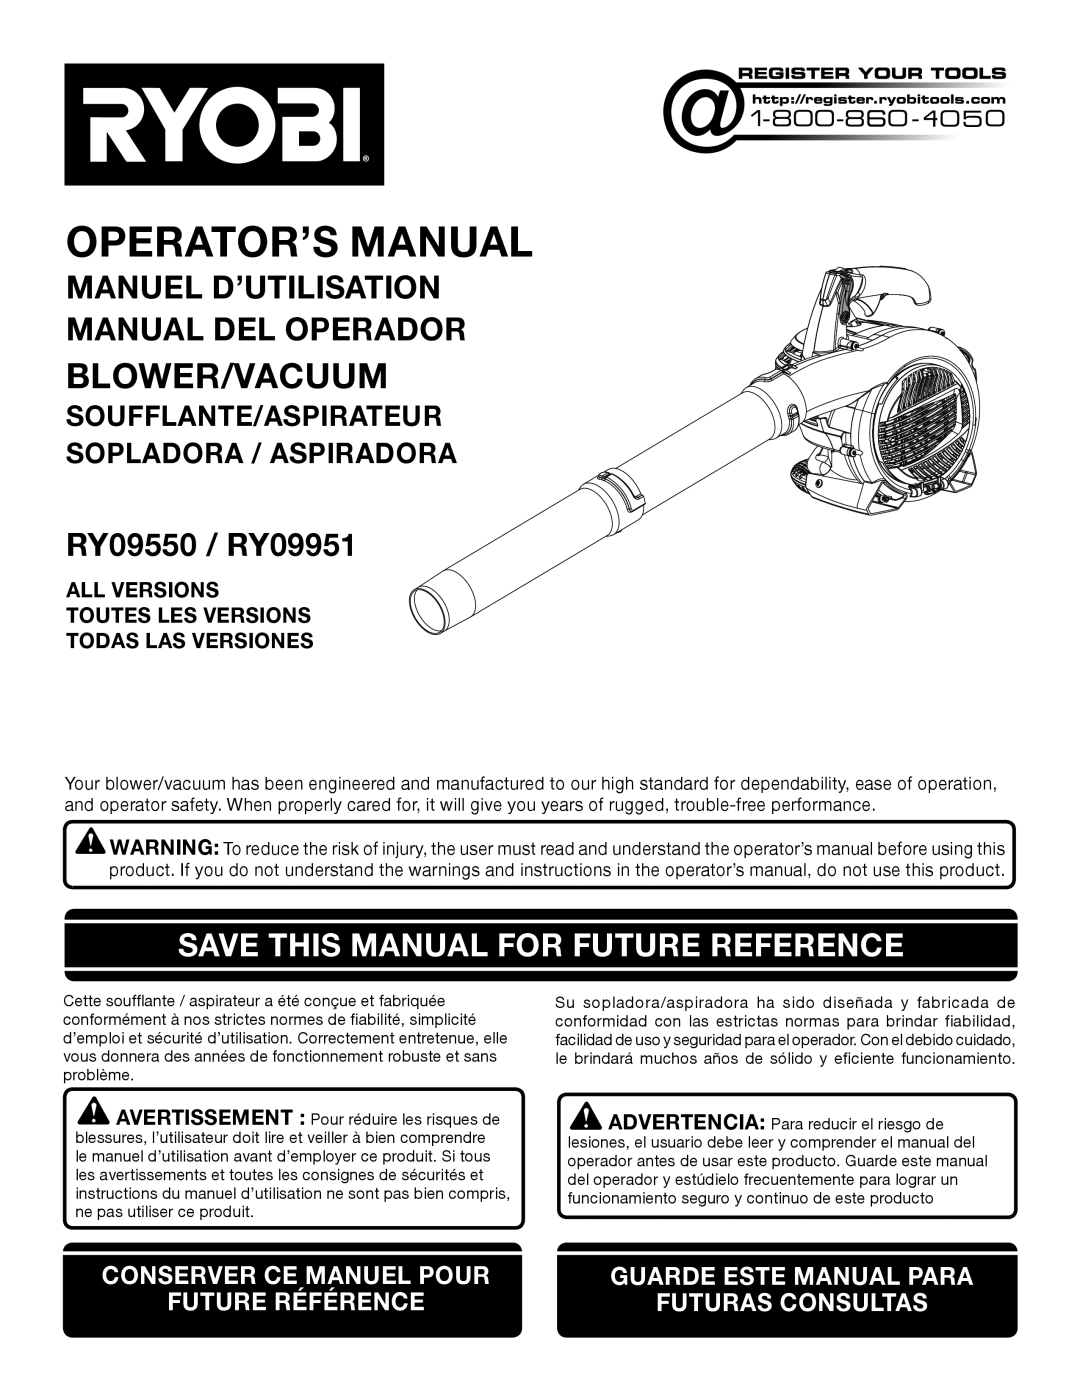 Ryobi RY09550 manuel dutilisation Blower/Vacuum, Save This Manual For Future Reference, All Versions Toutes Les Versions 